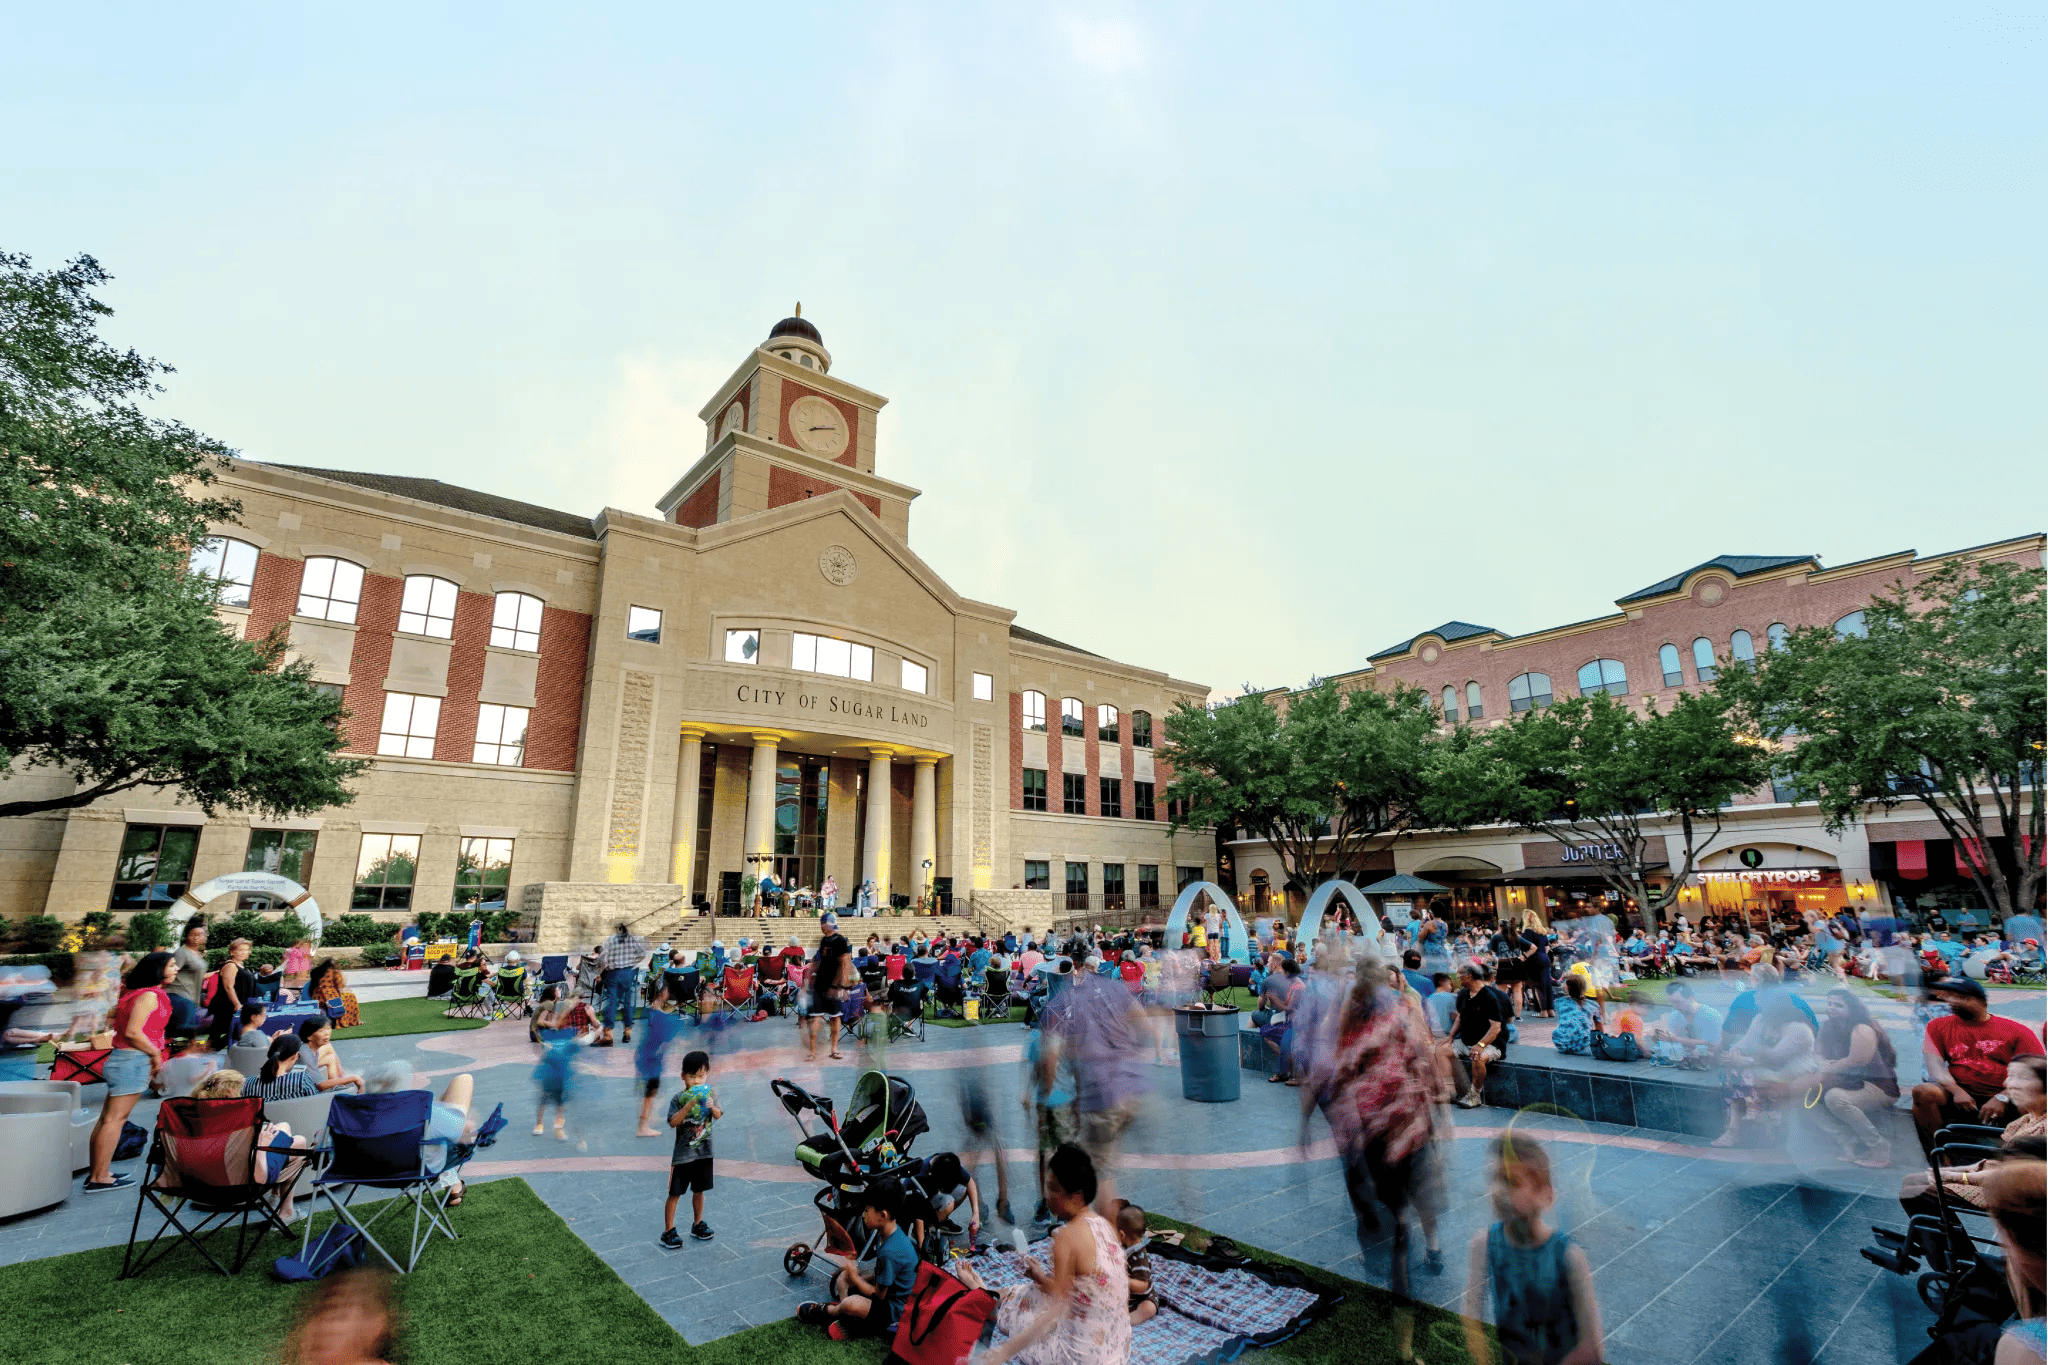 Looking for things to do in Sugar Land? Check out the crowd gathered in front of a building with a clock tower.